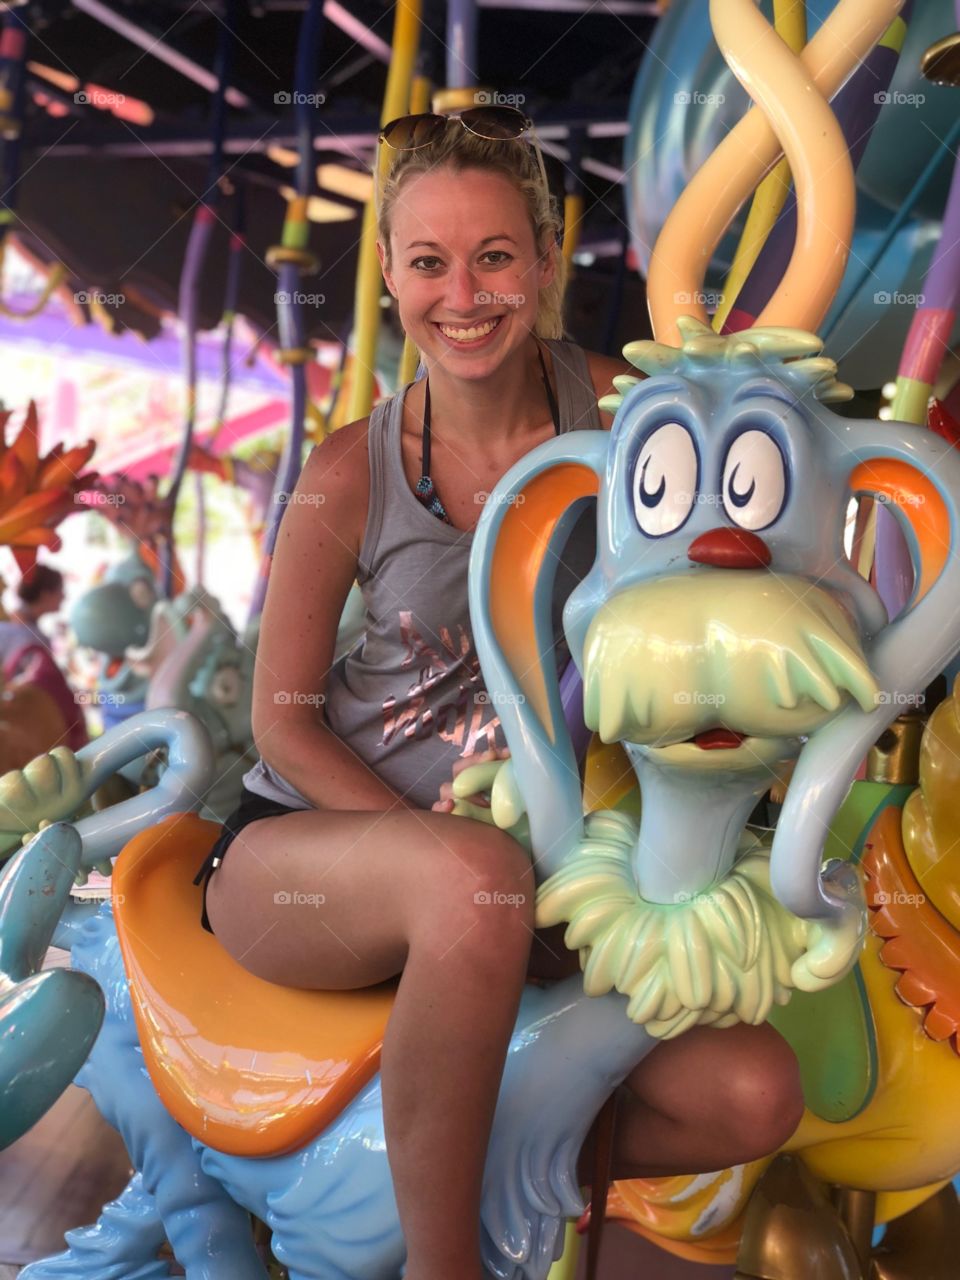 All smiles riding the Dr. Suess carousel at Universal Studios in Florida. Vacation time Is the best time!